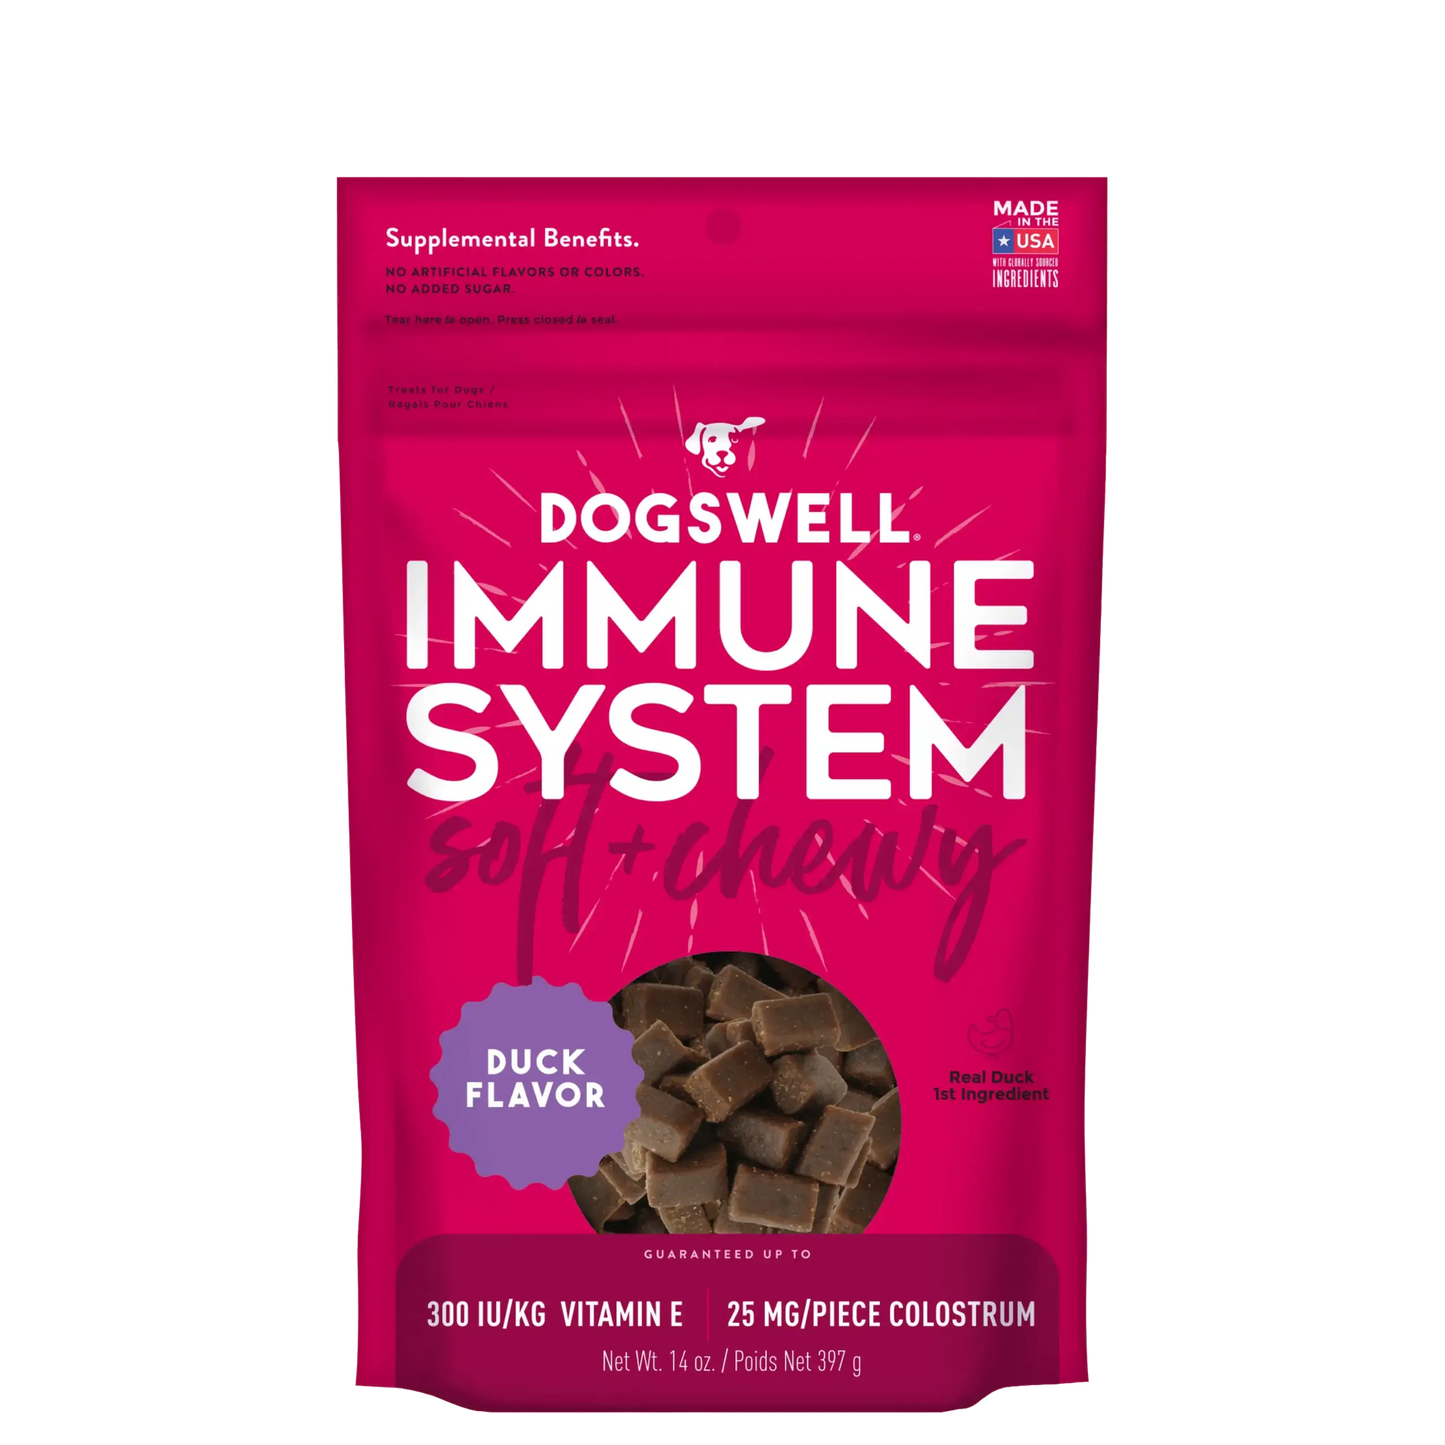 Dogswell Immune System Soft & Chewy Treats, Duck 14oz